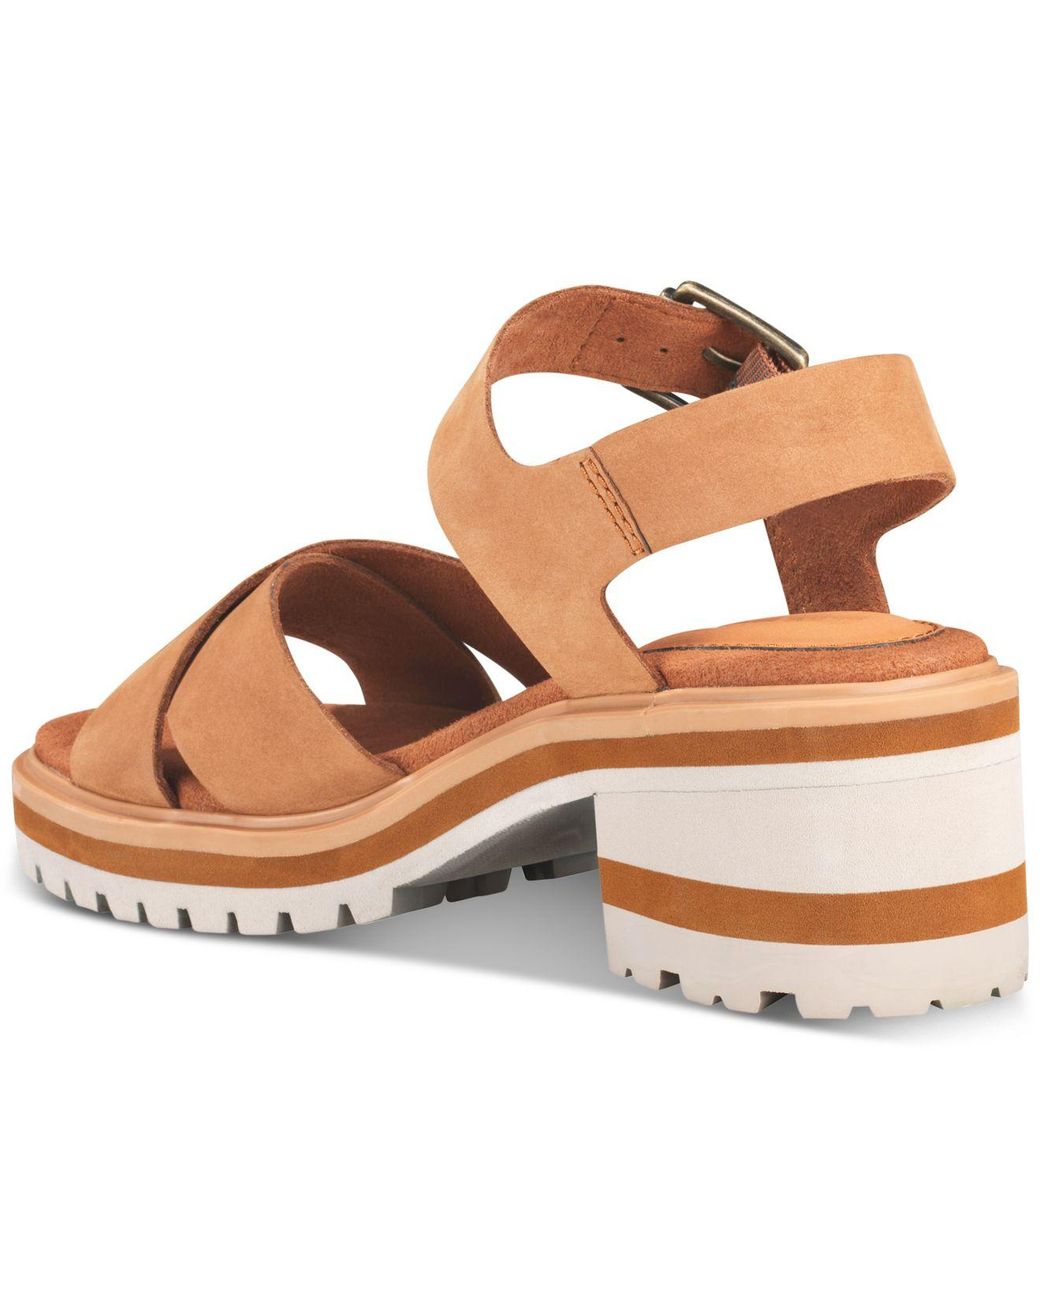 Timberland Violet Marsh Cross Band Sandal in Brown | Lyst